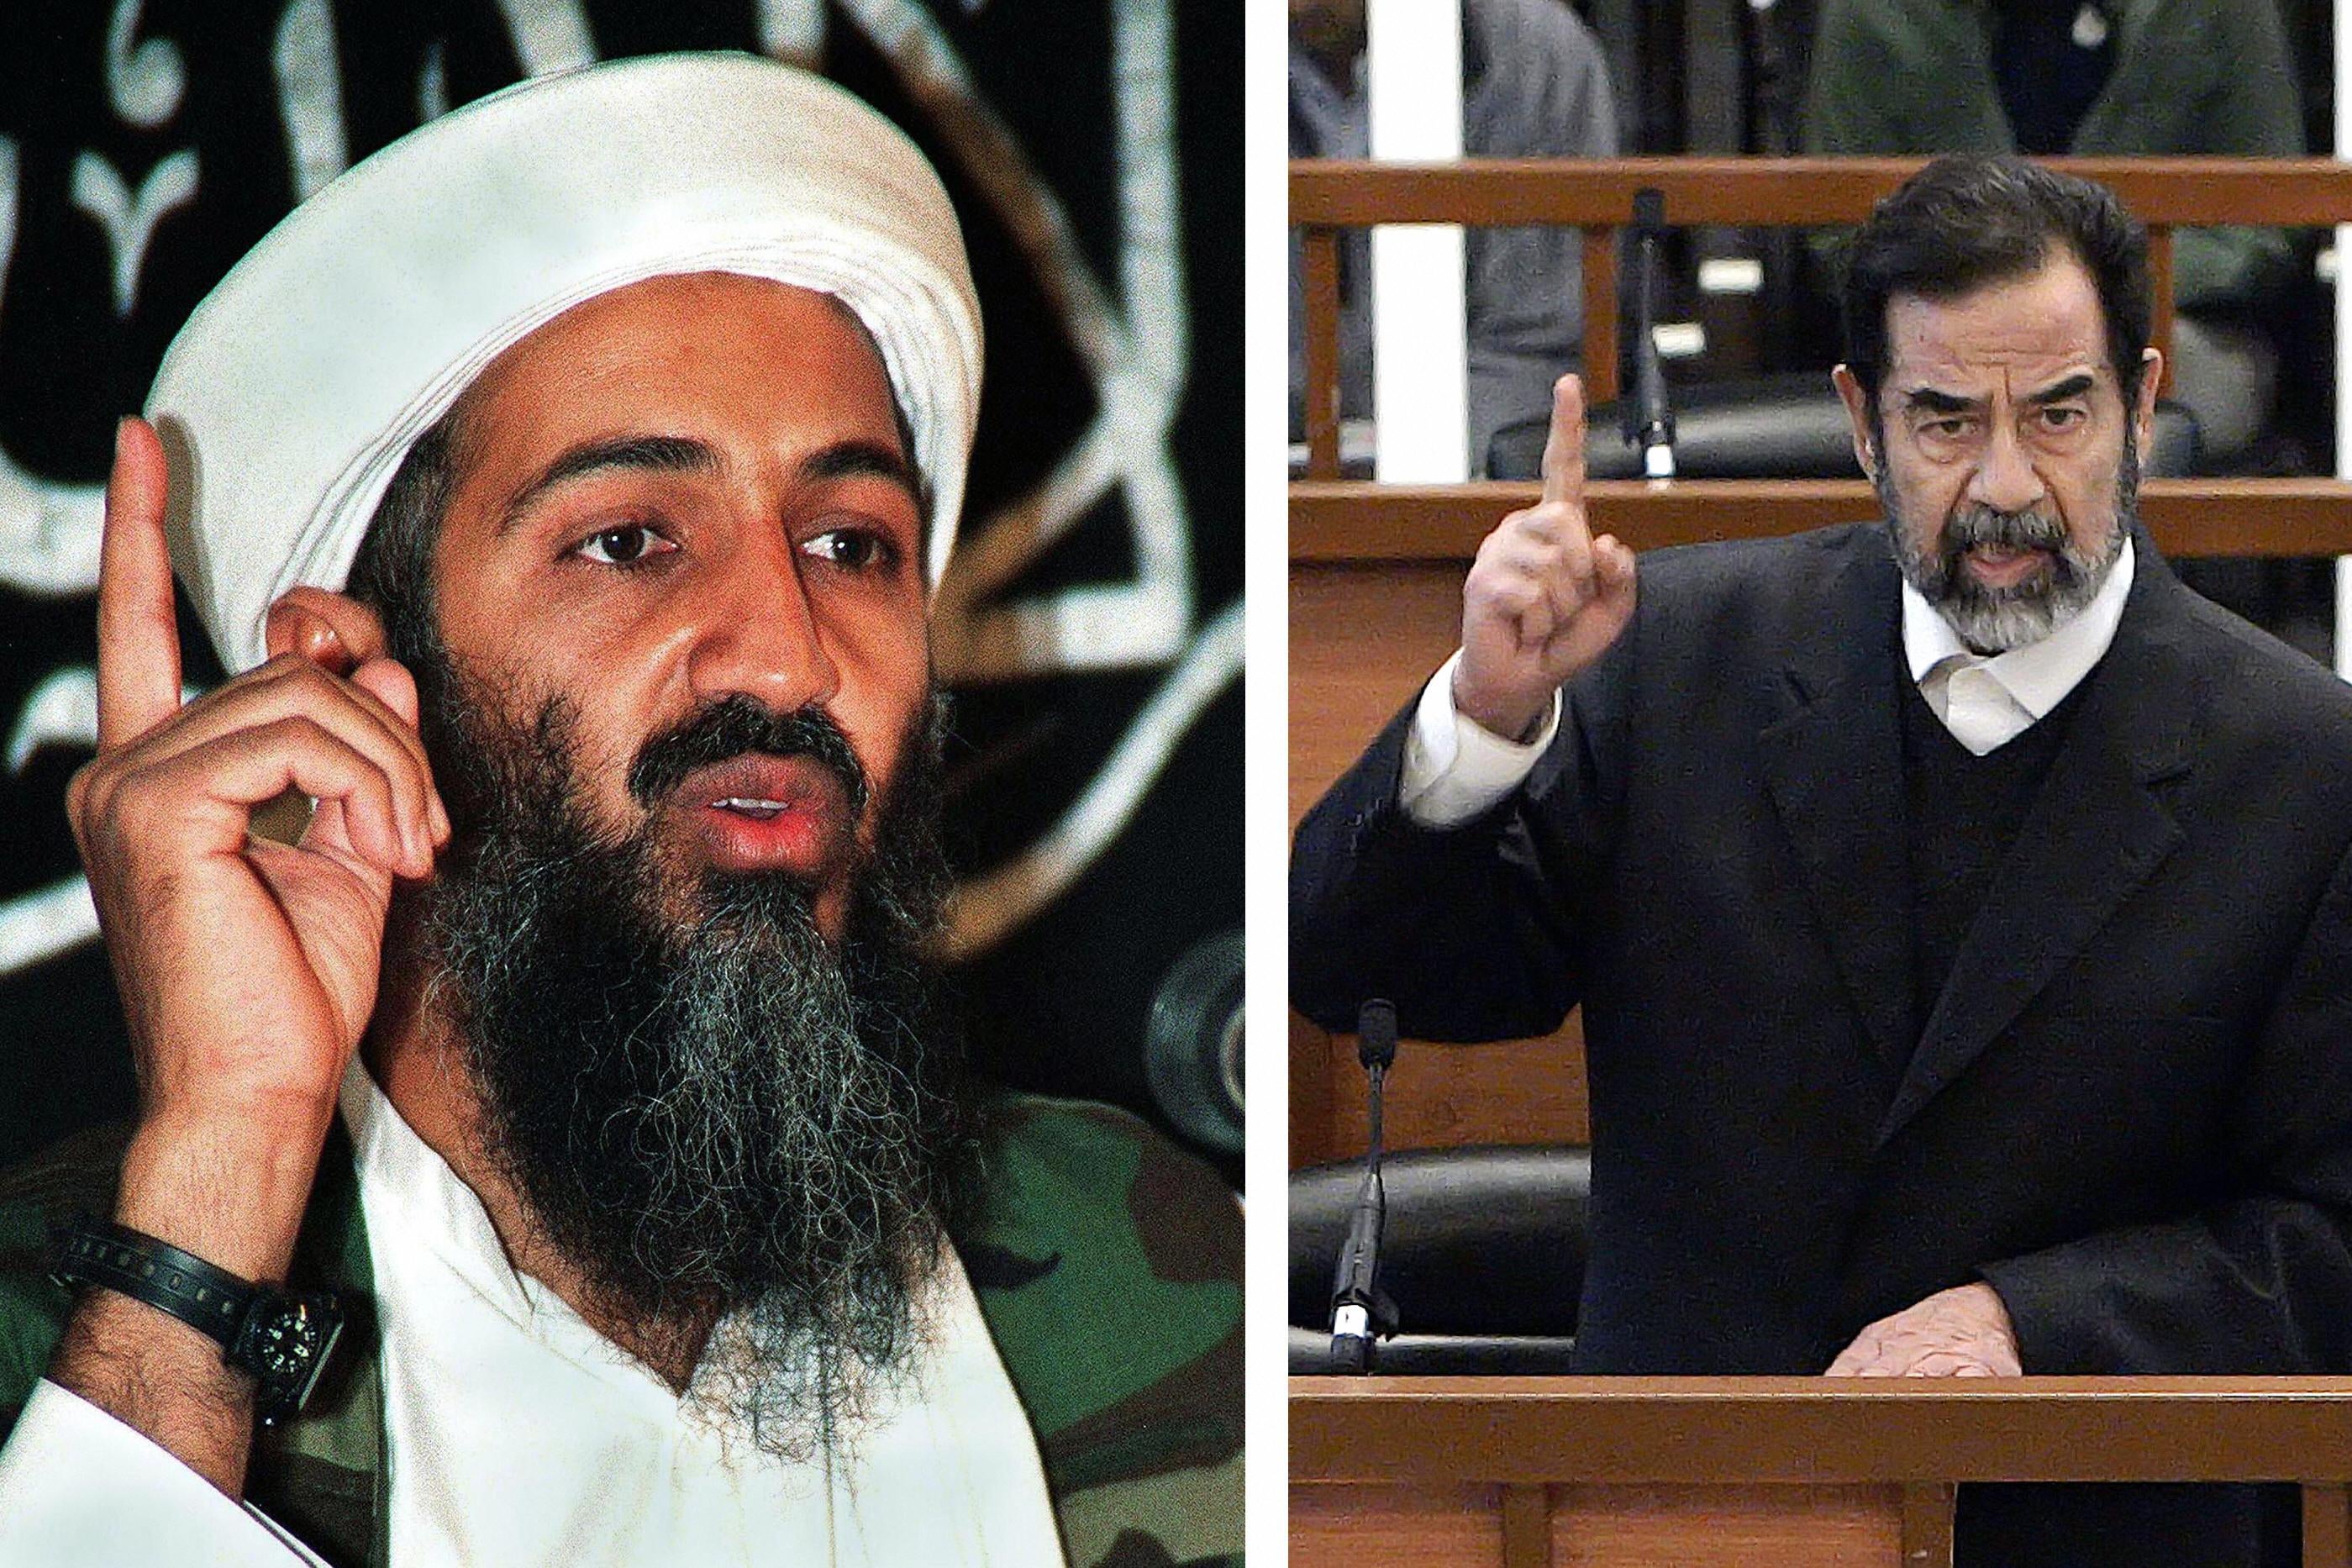 L: Osama bin Laden speaks with his right pointer in the air nest to him. R: Saddam Hussein speaks in court with his right pointer in the air in the same manner.